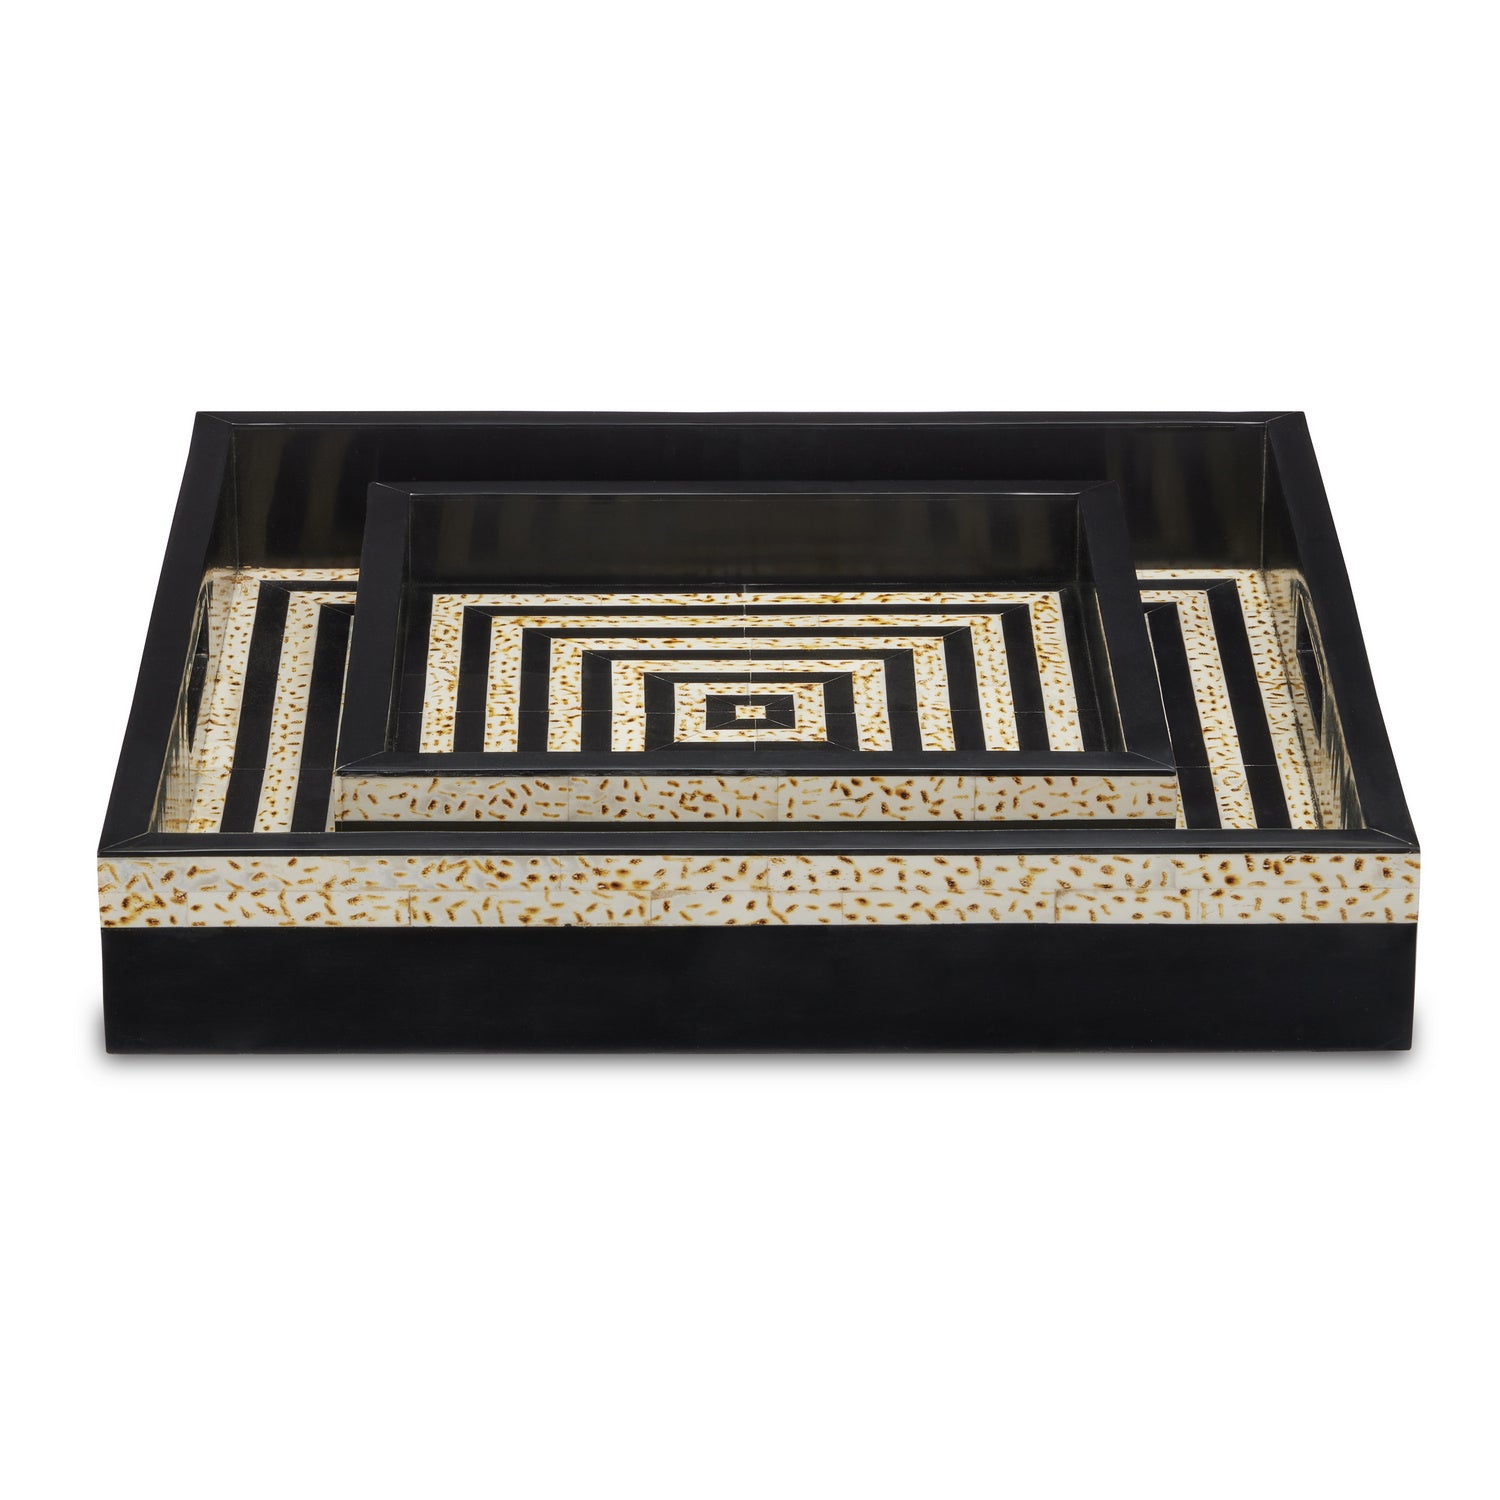 Tray Set of 2 from the Taurus collection in Black/White finish